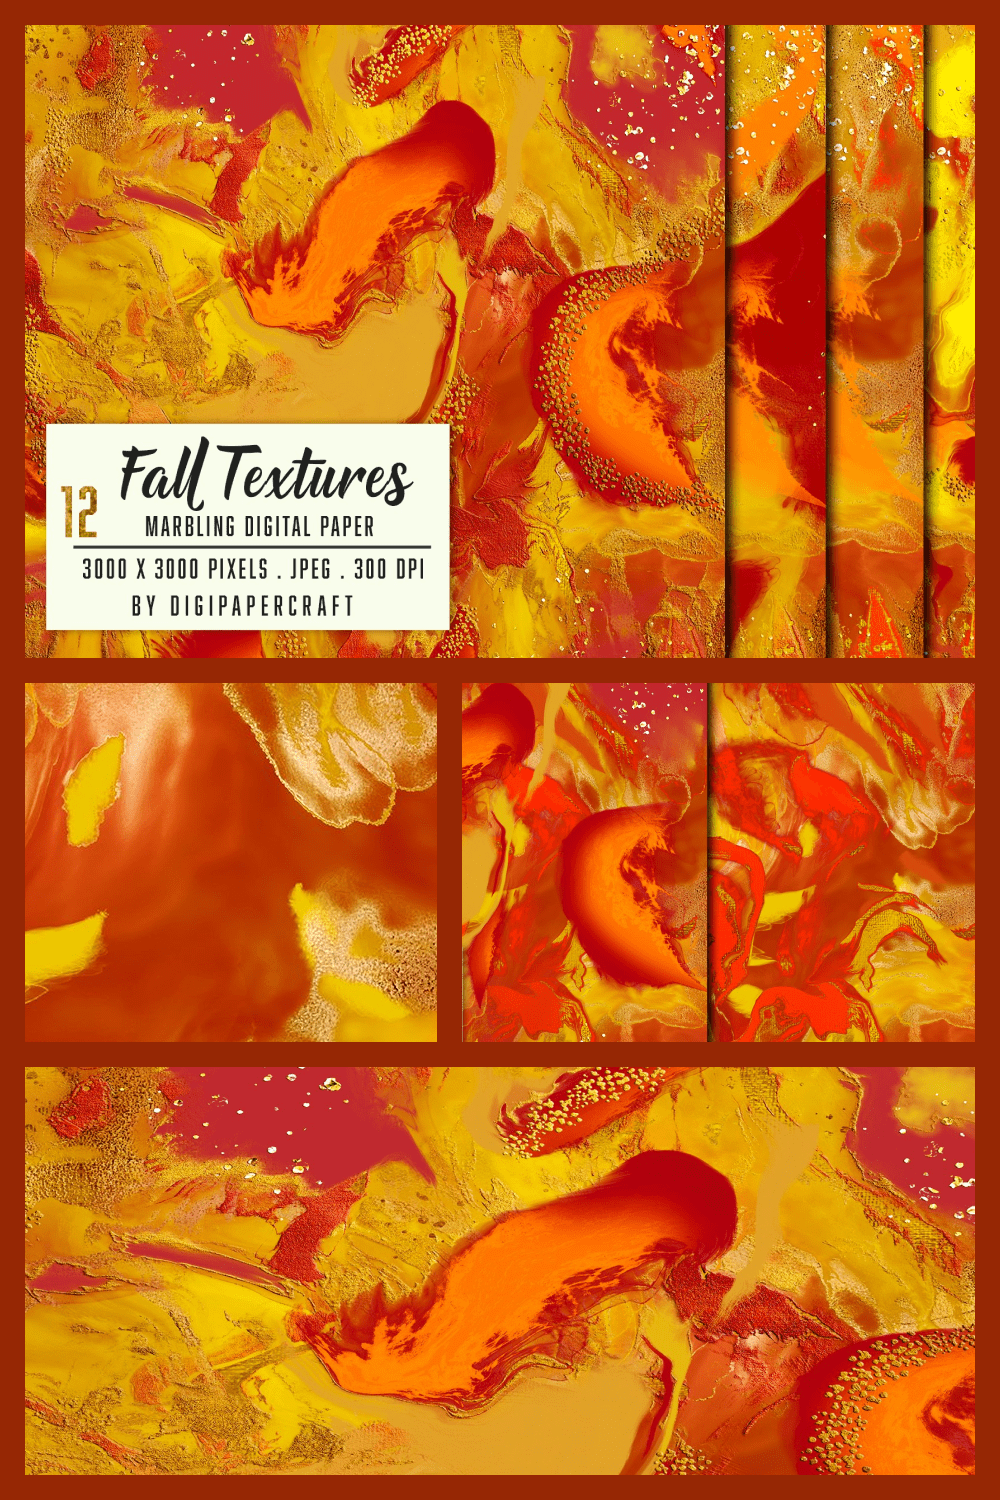 Collage of images with marble textures in orange color.